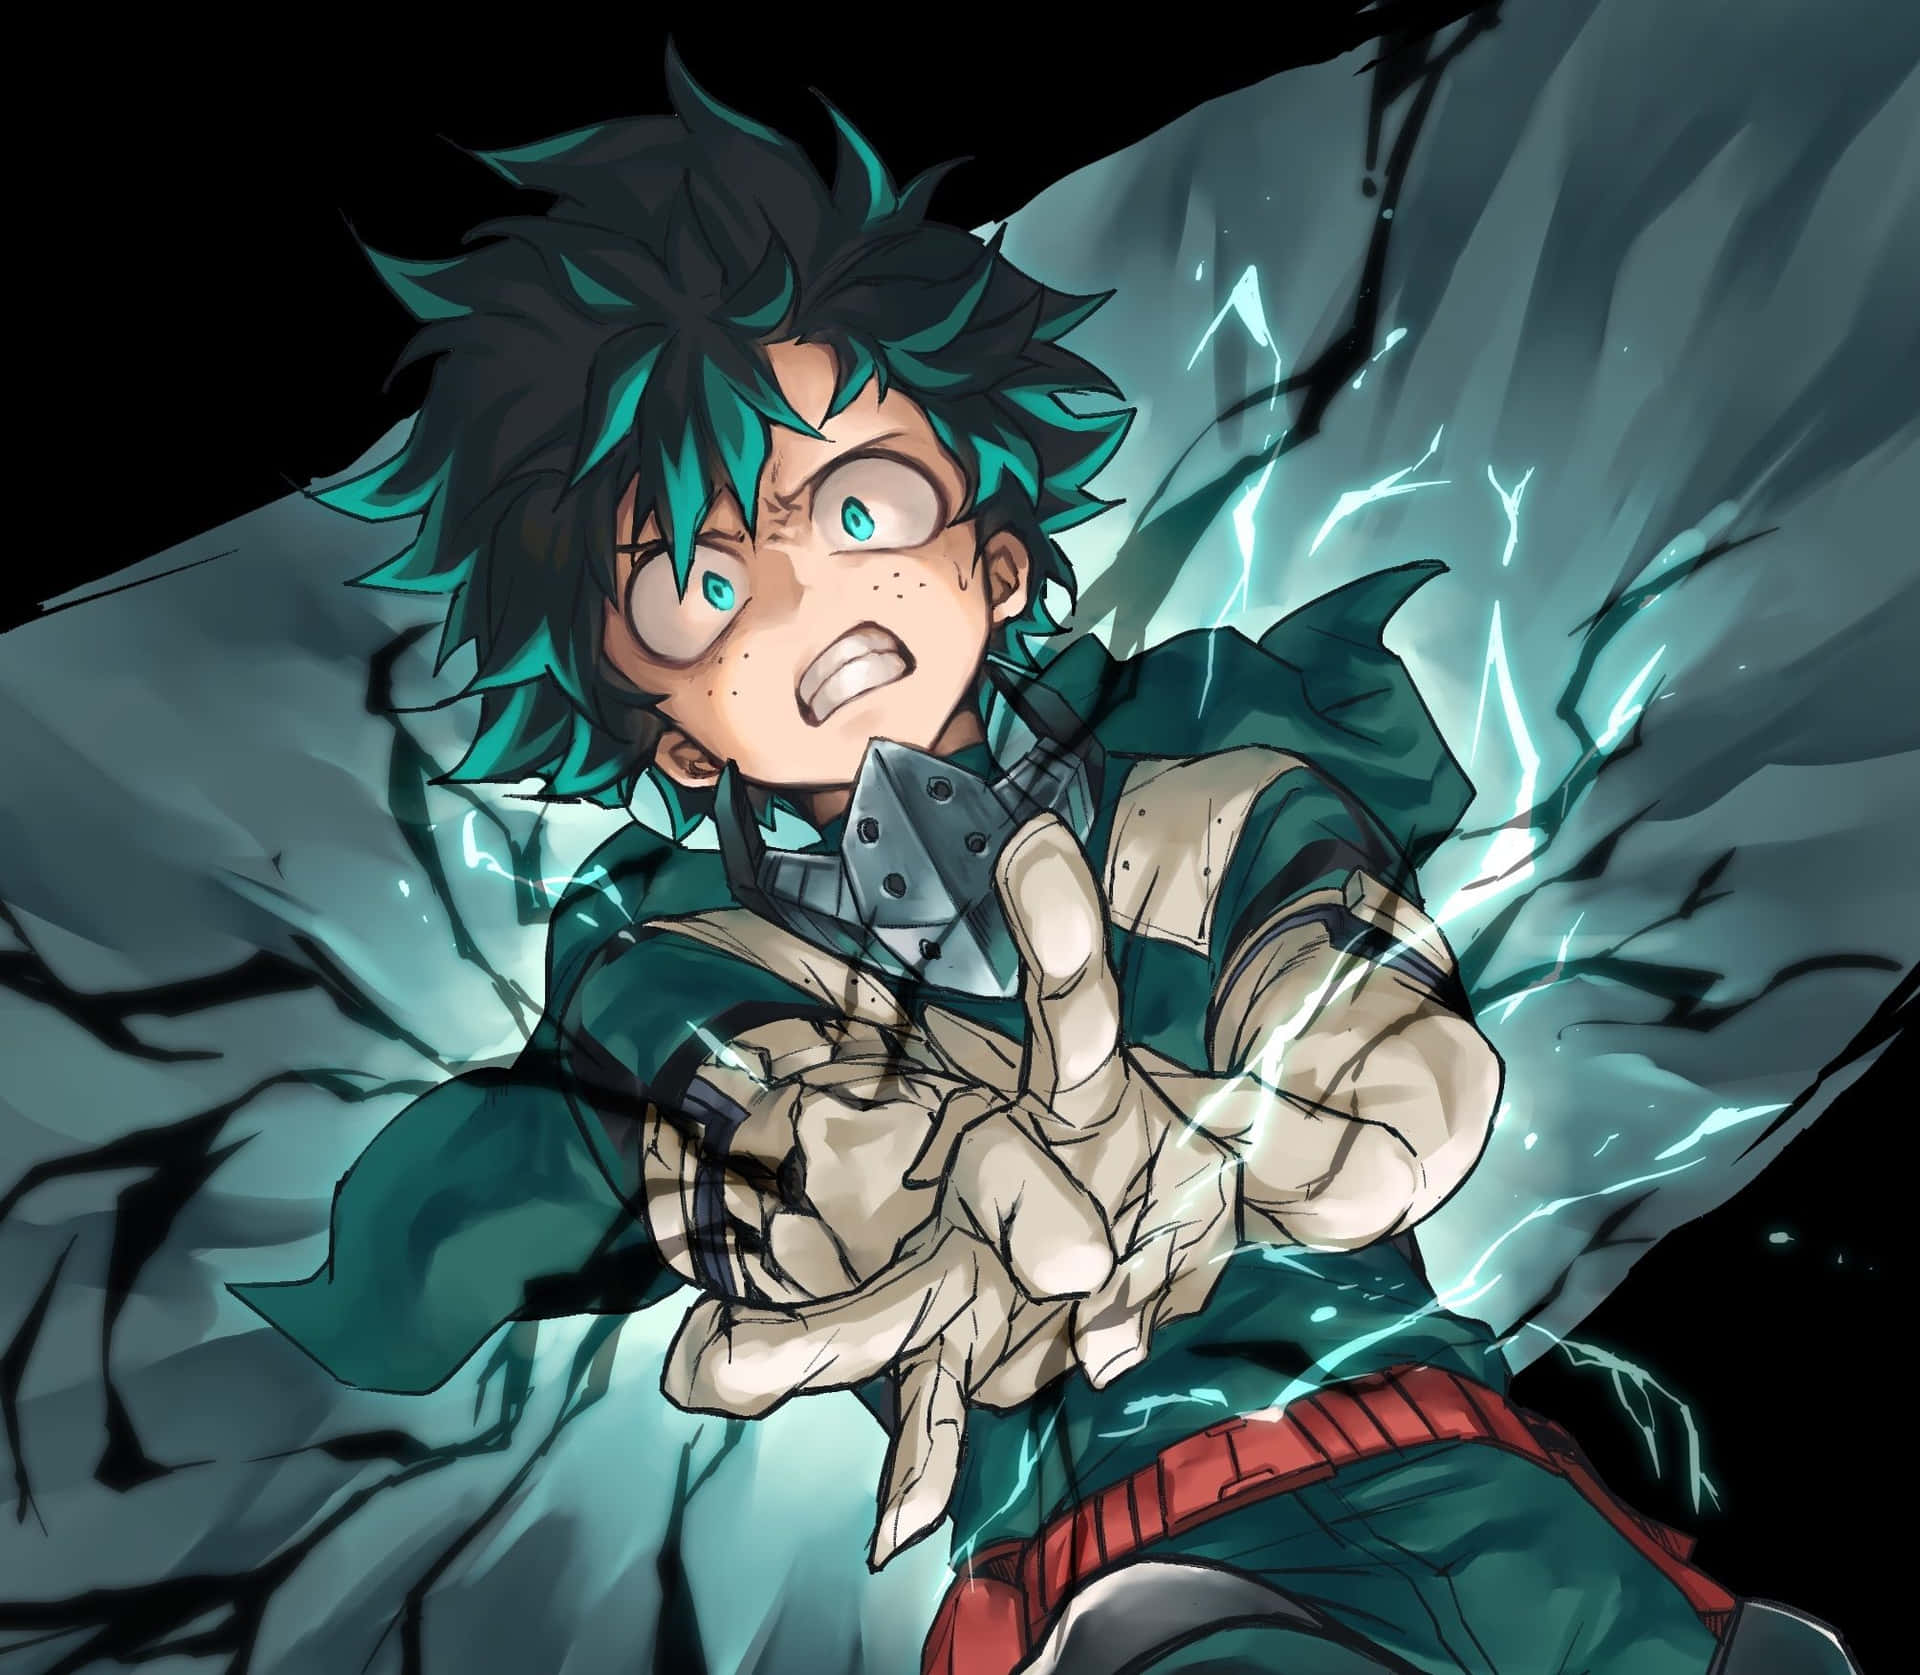 colleen ohara share show me a picture of deku photos